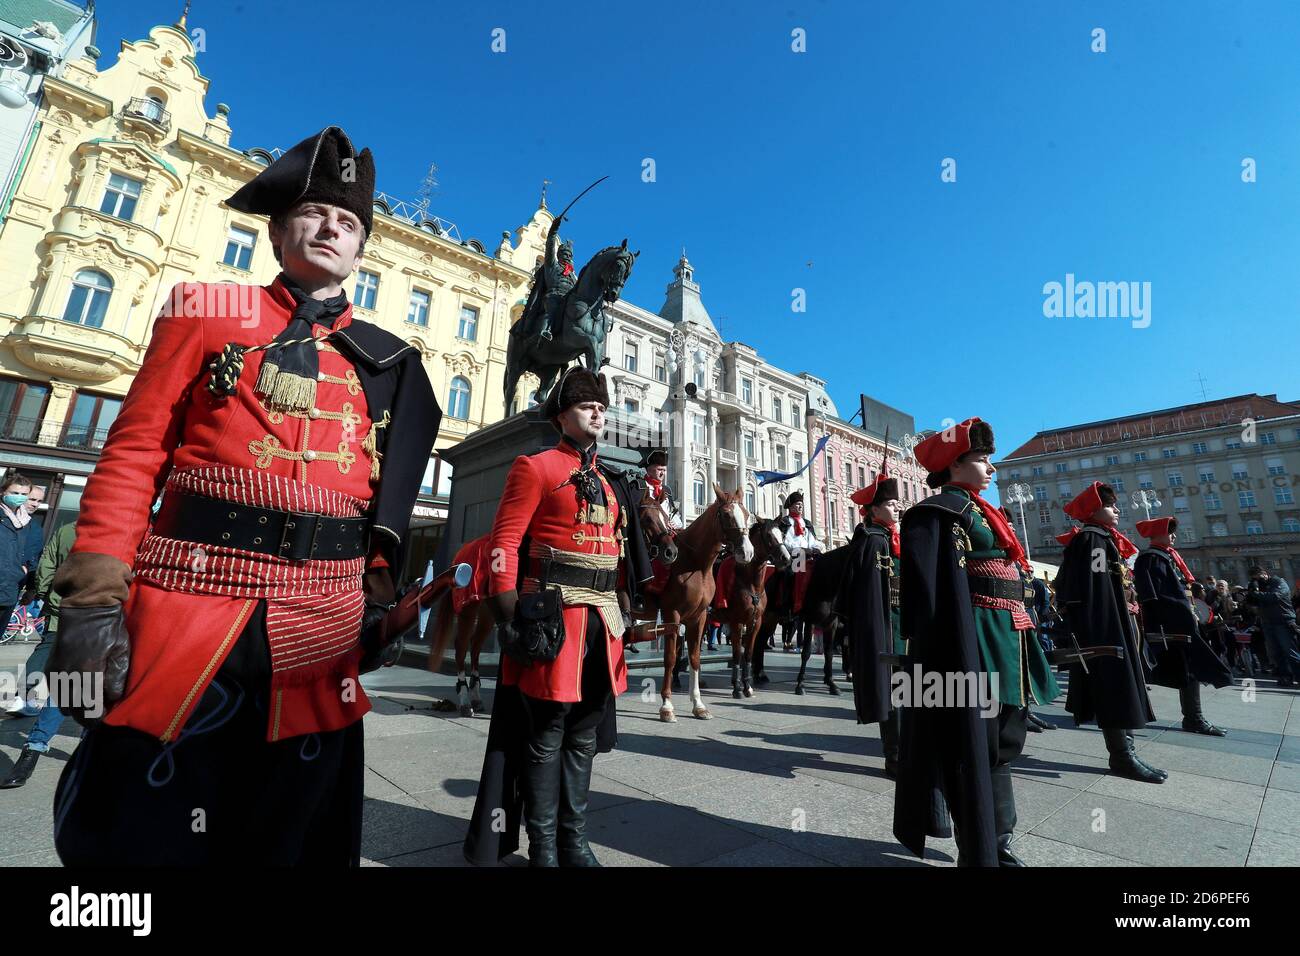 (201019) -- ZAGREB, Oct. 19, 2020 (Xinhua) -- Members of the Cravat Regiment take part in the Cravat Day celebration in Zagreb, Croatia, on Oct. 18, 2020. Croatians celebrate World Cravat Day on Oct. 18 every year. The Cravat, symbol of culture and style, originated from a red neck scarves worn by Croatian soldiers serving in France in the 17th century. (Sanjin Strukic/Pixsell via Xinhua) Stock Photo